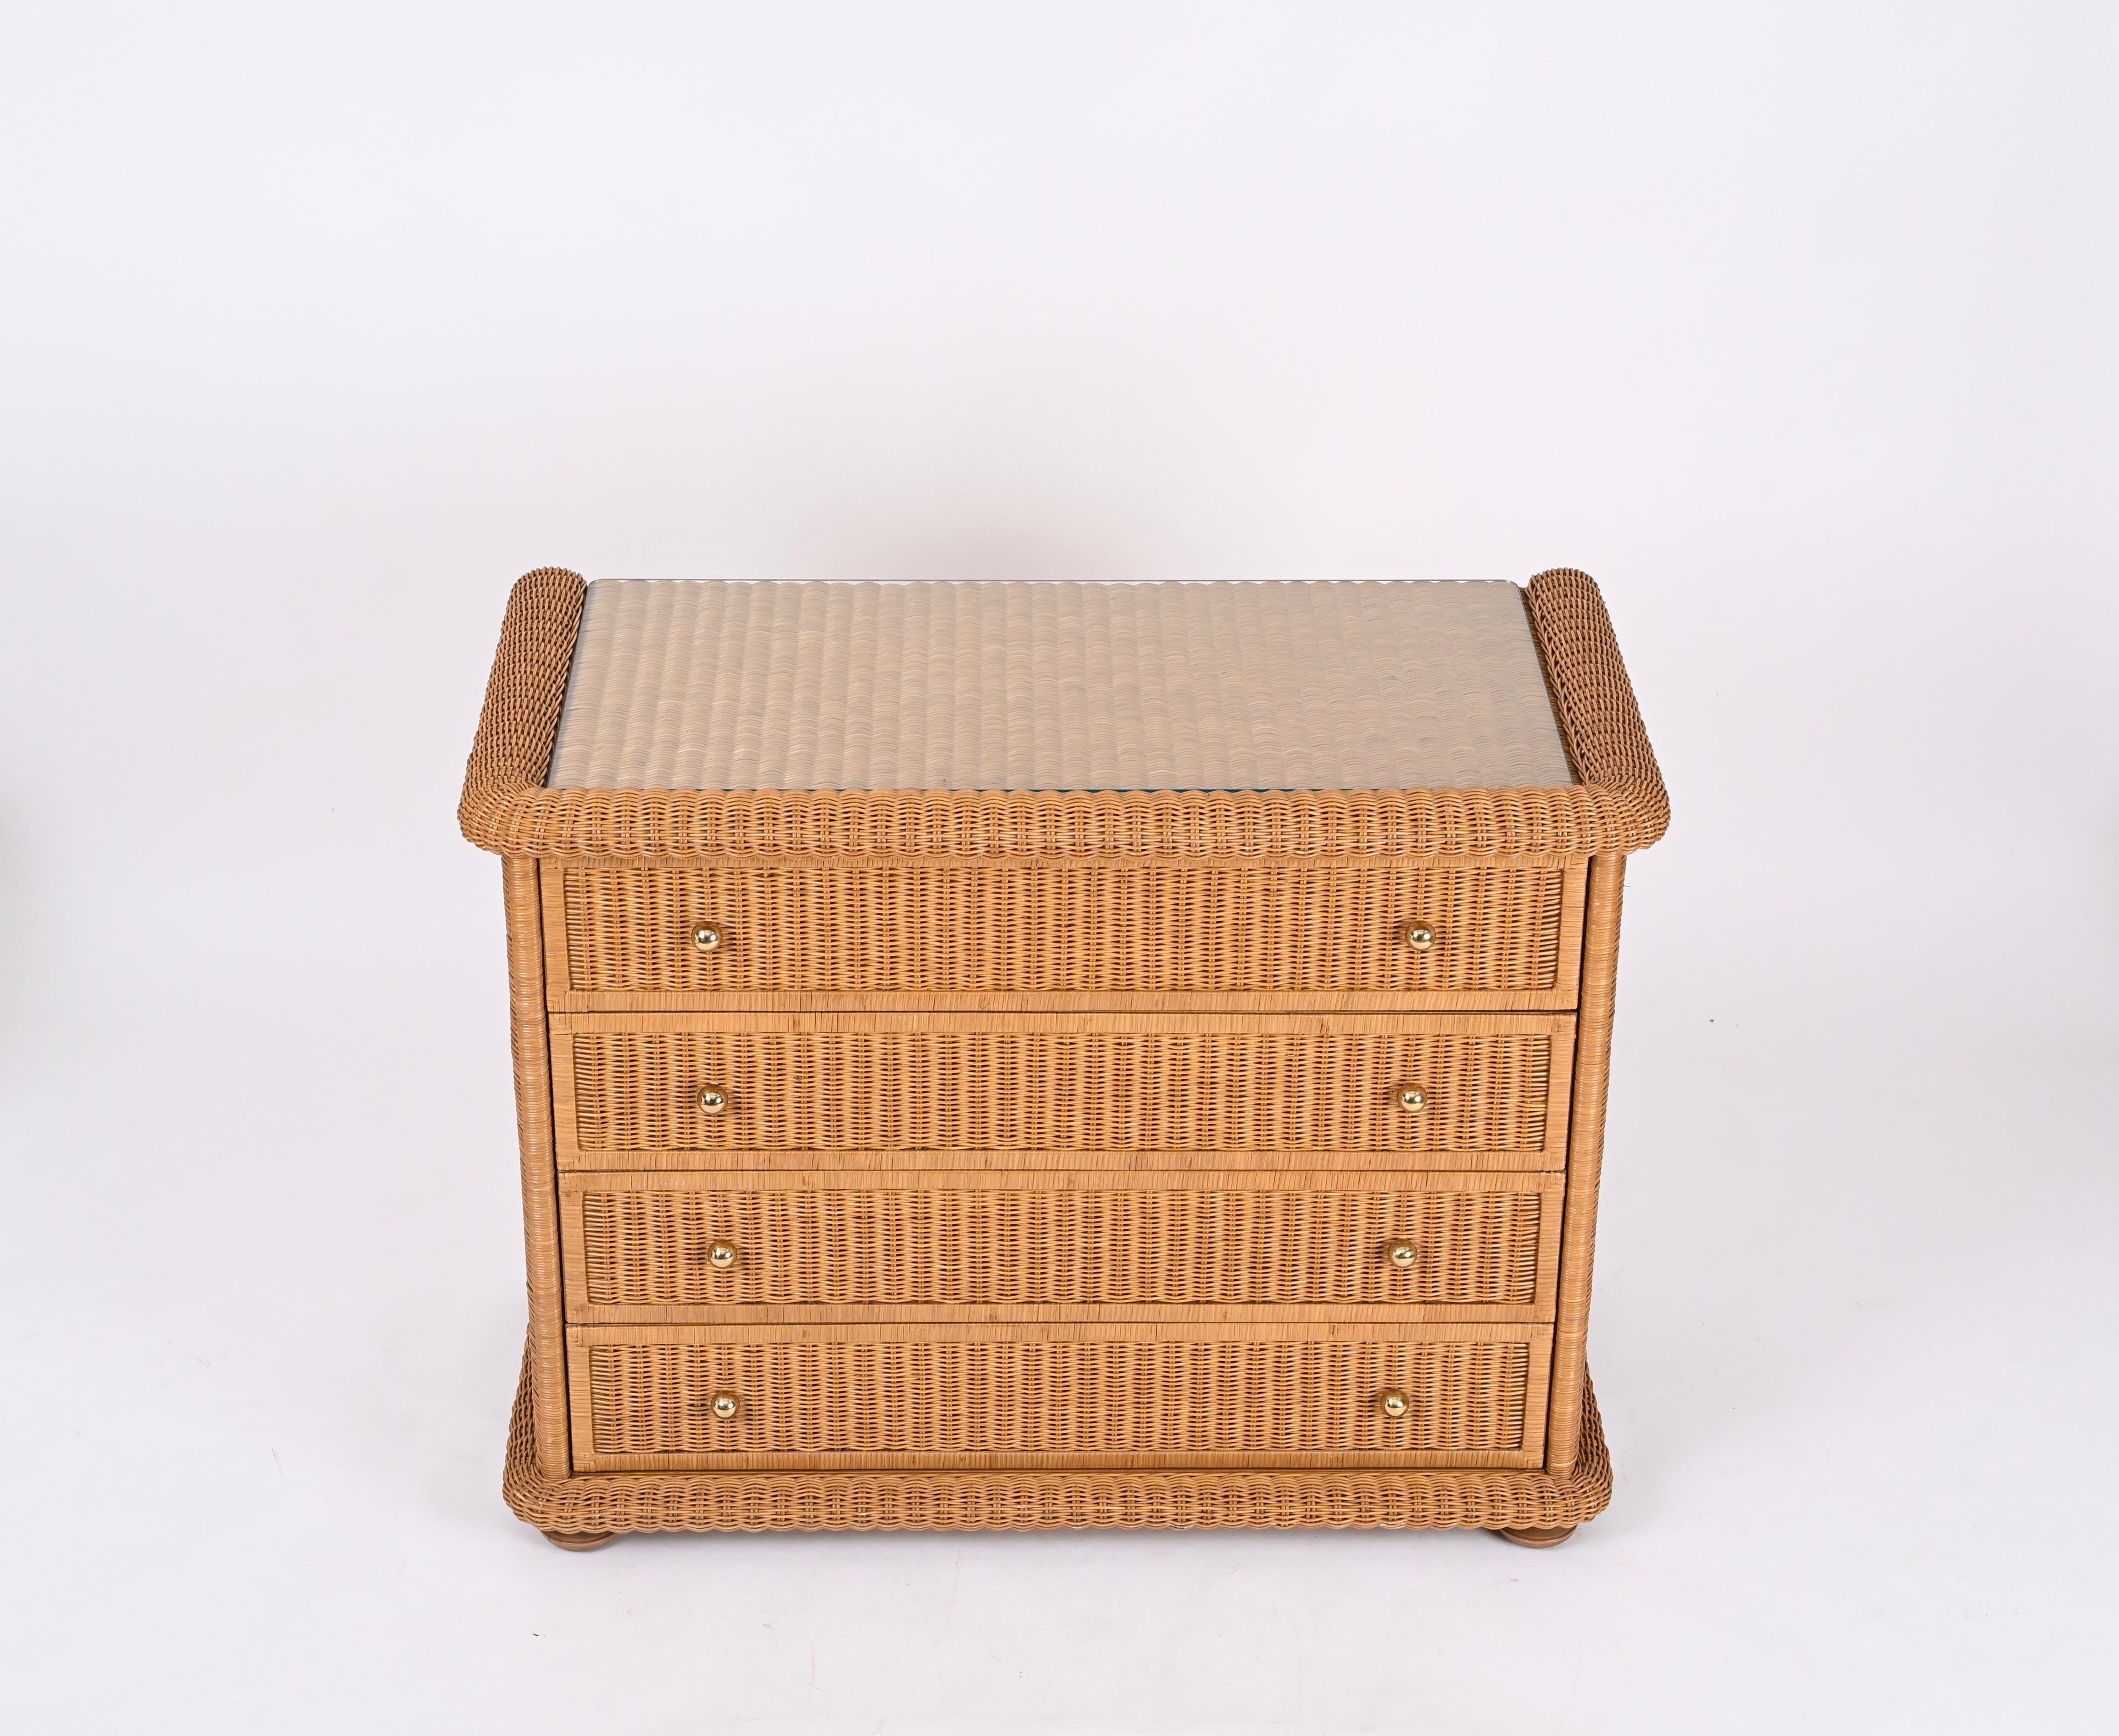 Wicker French Riviera Chest of Drawers in Woven Rattan by Vivai del Sud, Italy, 1970s For Sale